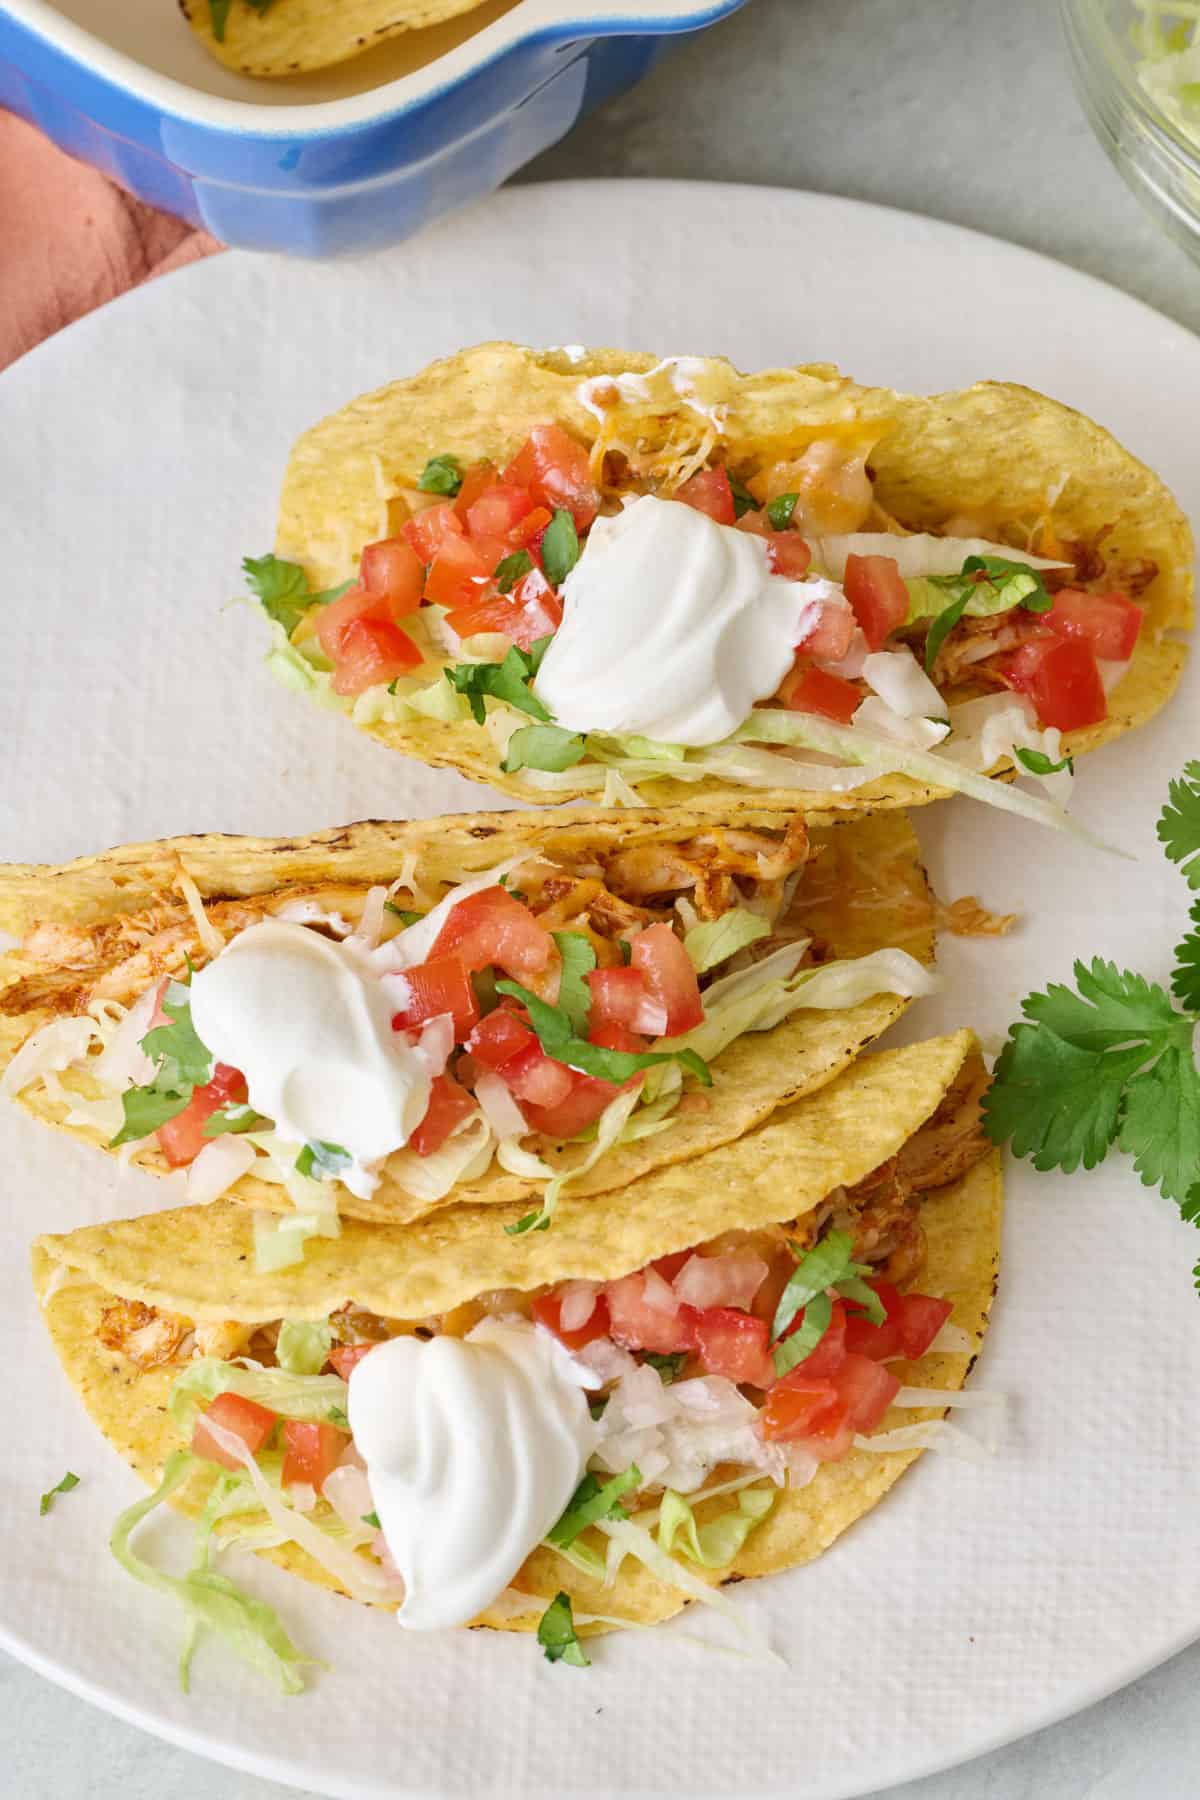 3 prepared baked chicken tacos on a small plate garnished with sour cream, tomatoes, and fresh cilantro.